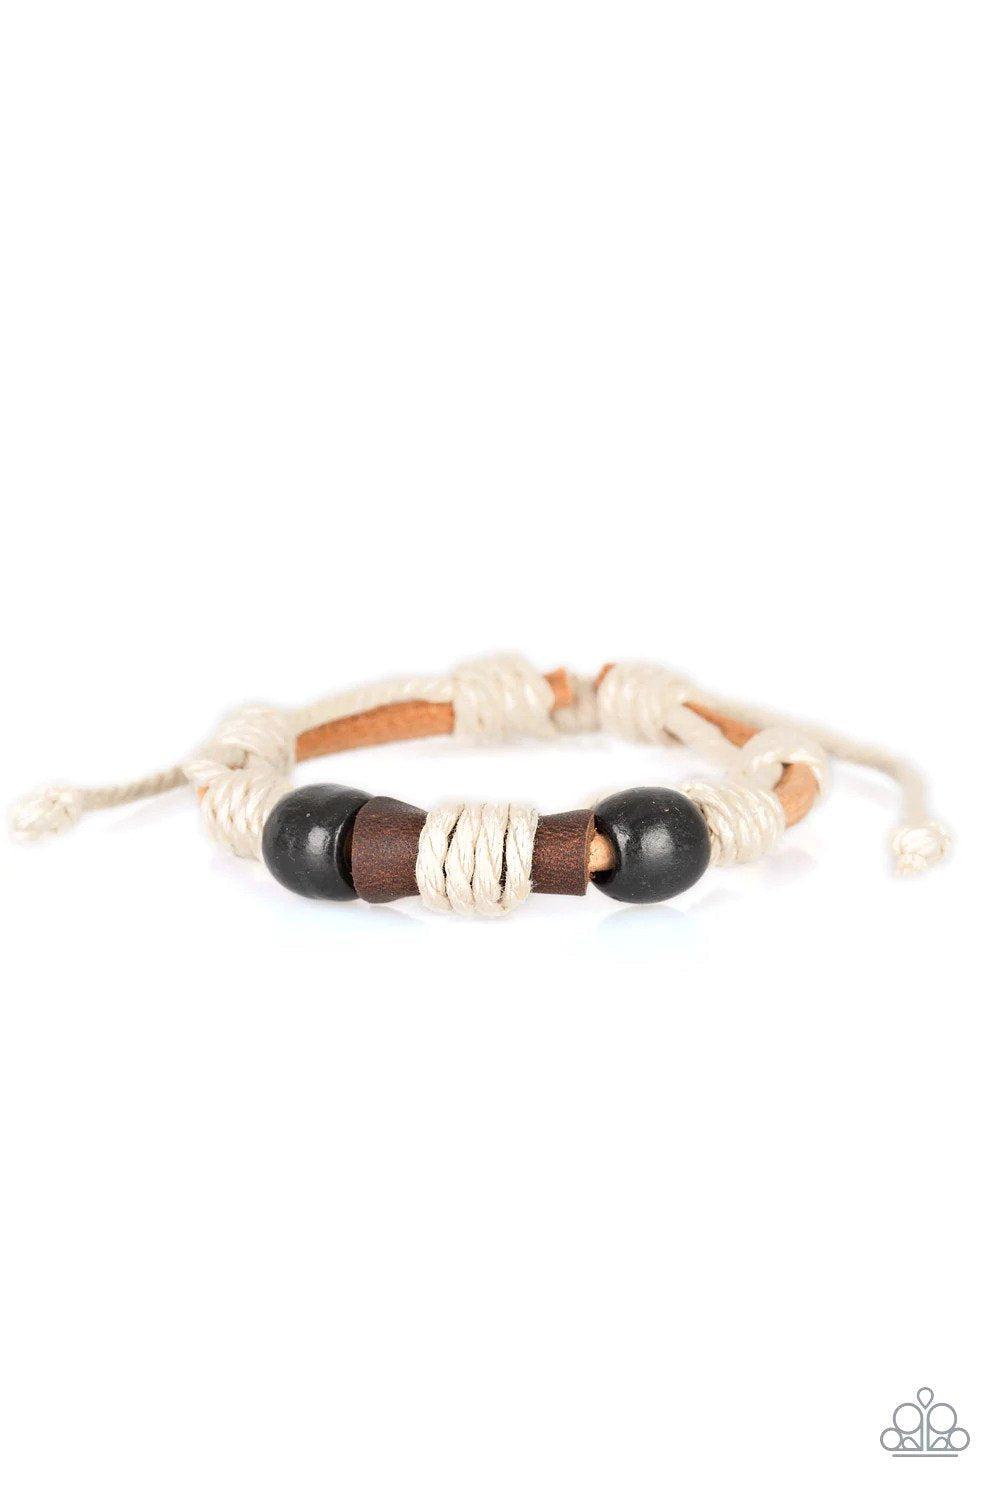 Back In The Backwoods Black & White Urban Bracelet - Paparazzi Accessories- lightbox - CarasShop.com - $5 Jewelry by Cara Jewels